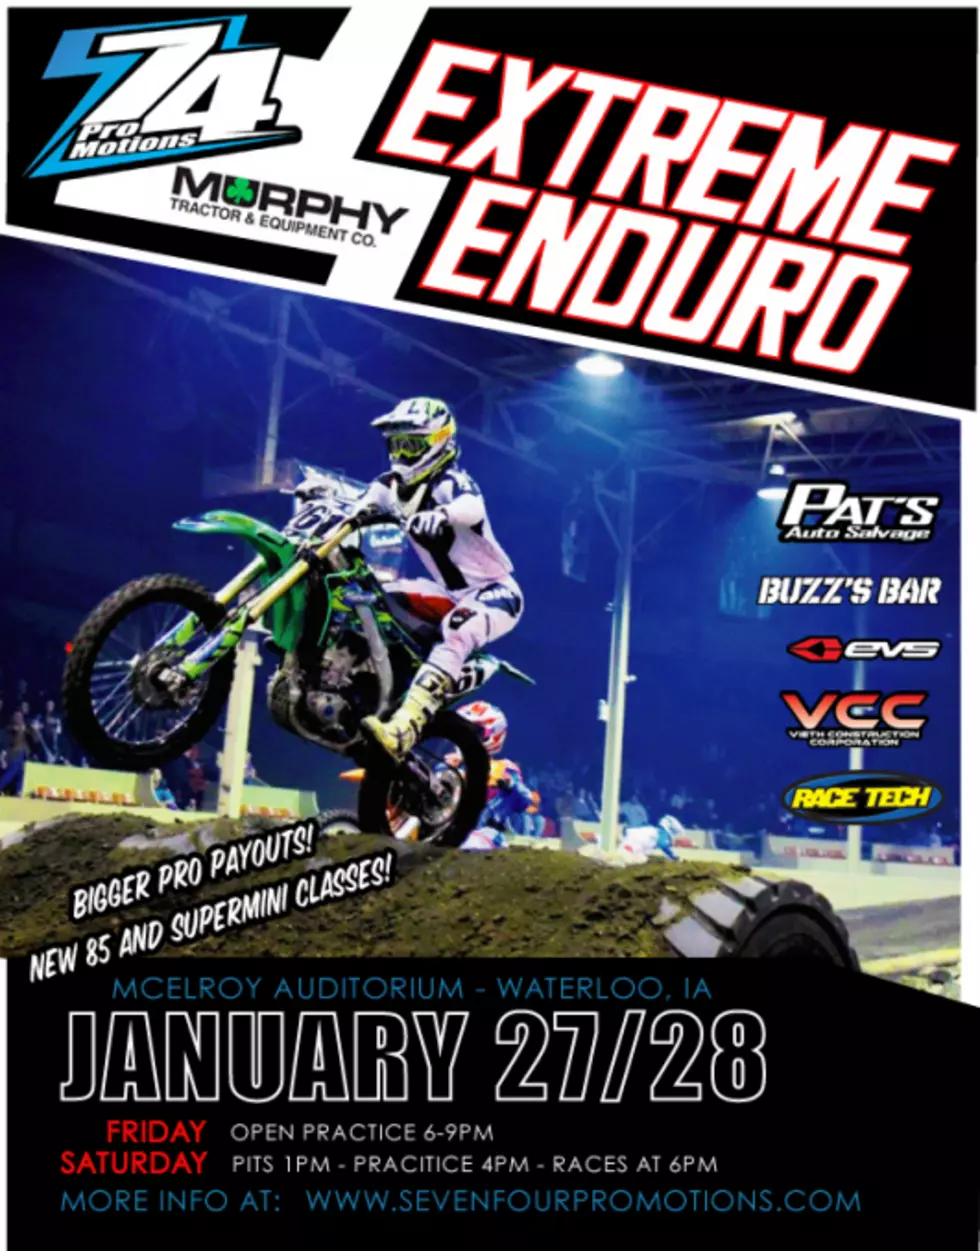 EnduroCross This Weekend at McElroy